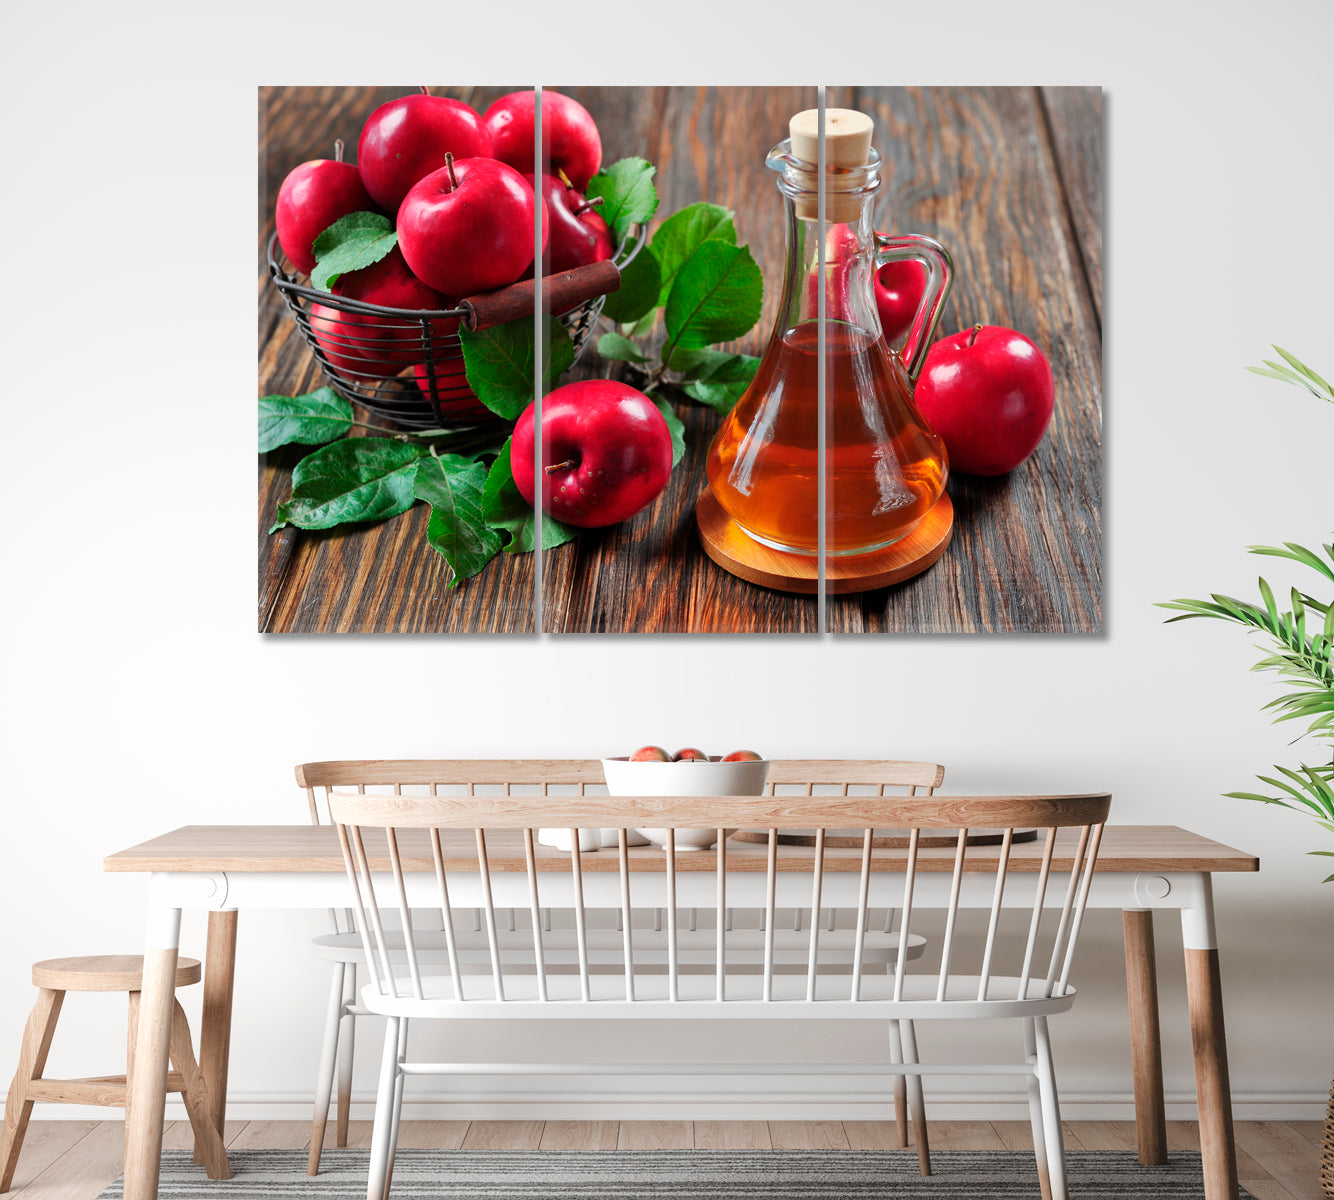 Apple Cider Vinegar and Basket with Apples Canvas Print ArtLexy 3 Panels 36"x24" inches 